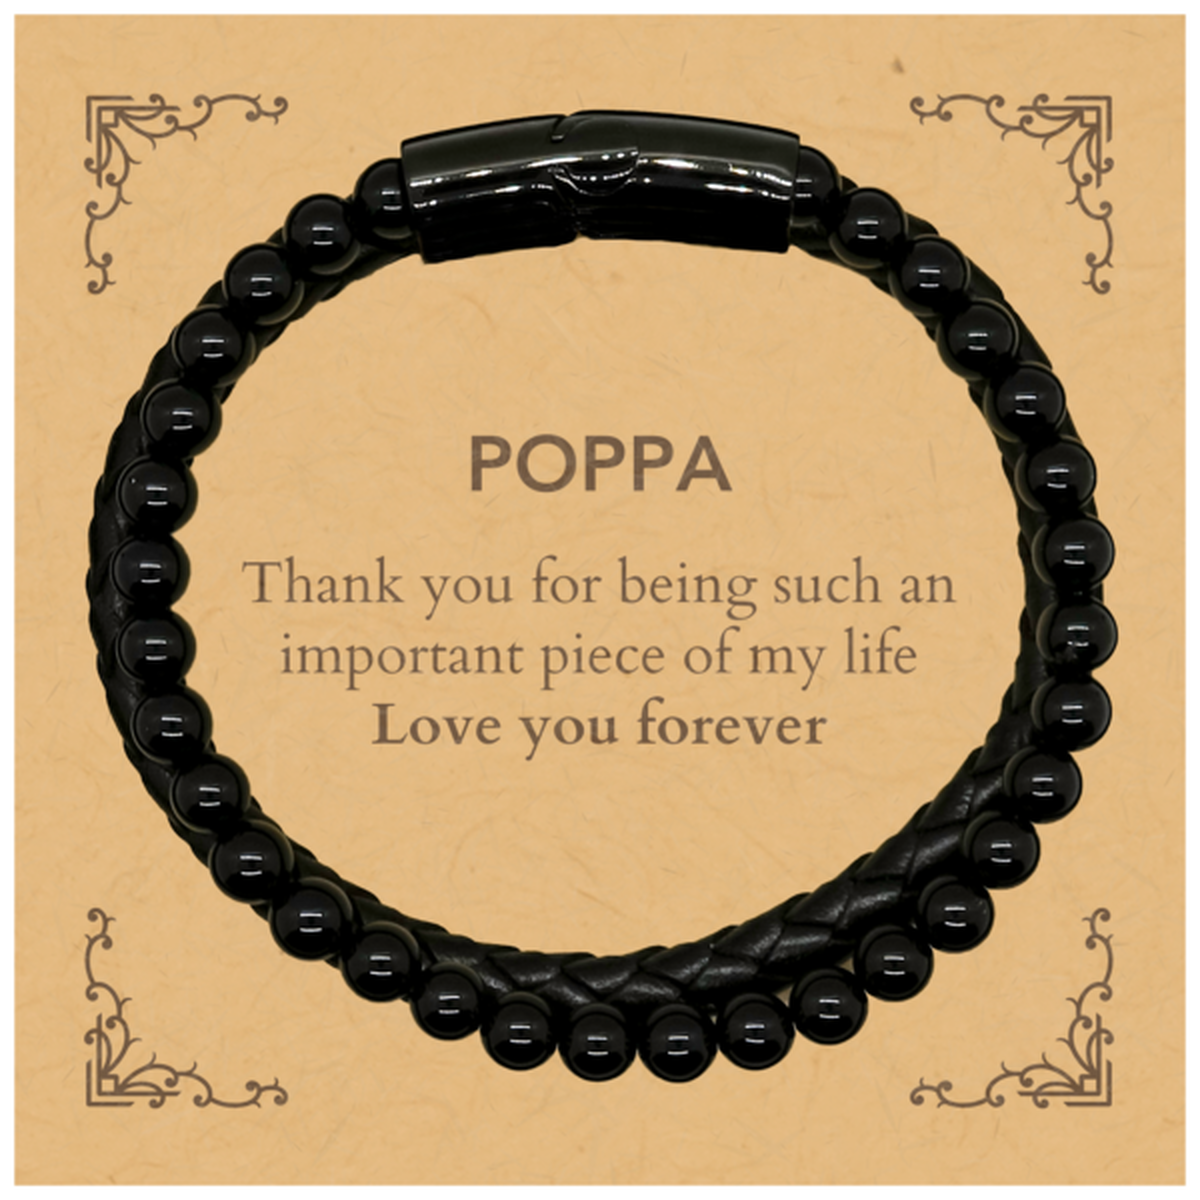 Appropriate Poppa Stone Leather Bracelets Epic Birthday Gifts for Poppa Thank you for being such an important piece of my life Poppa Christmas Mothers Fathers Day